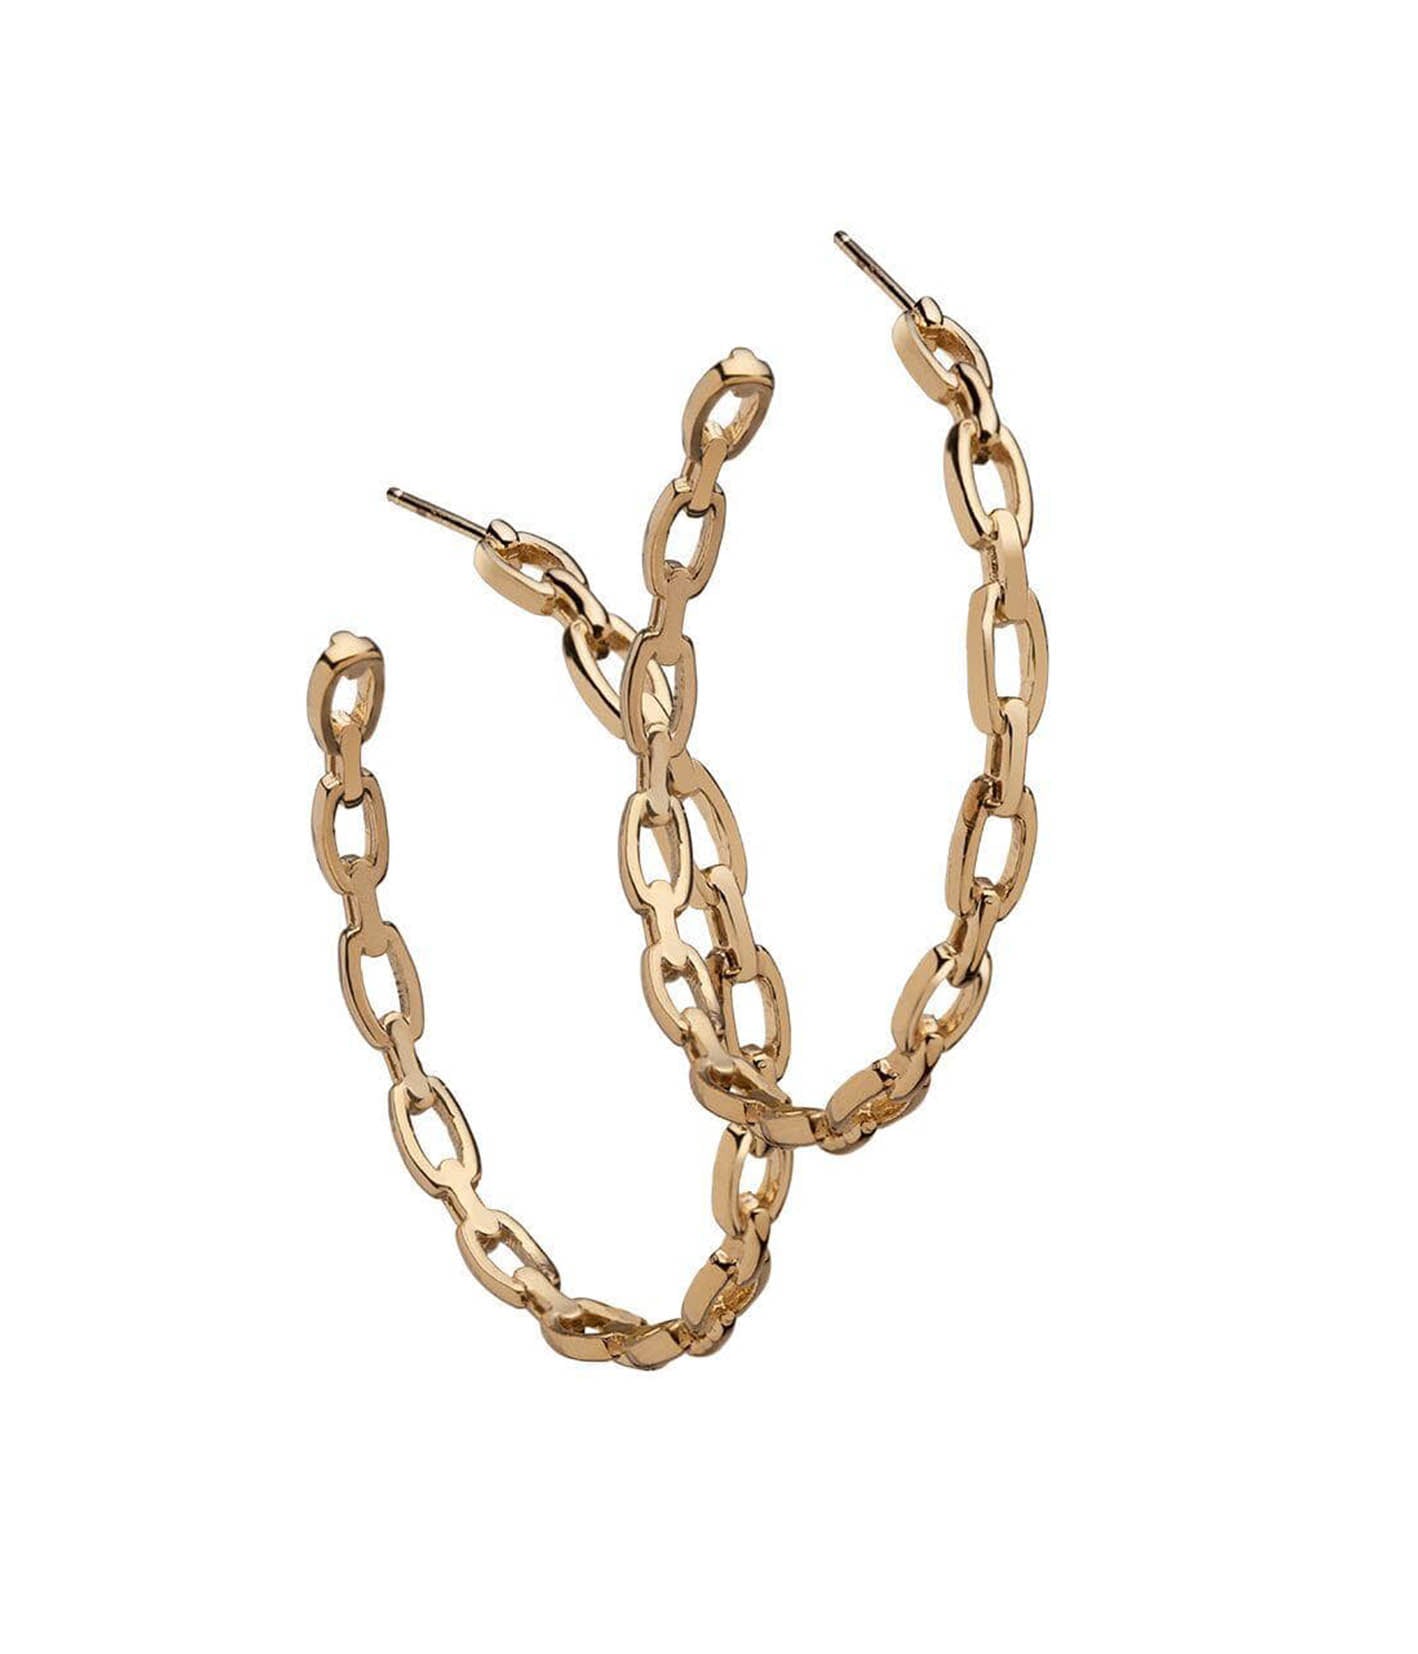 Carmine 2 Hoops in 14K Yellow Gold Plated Silver